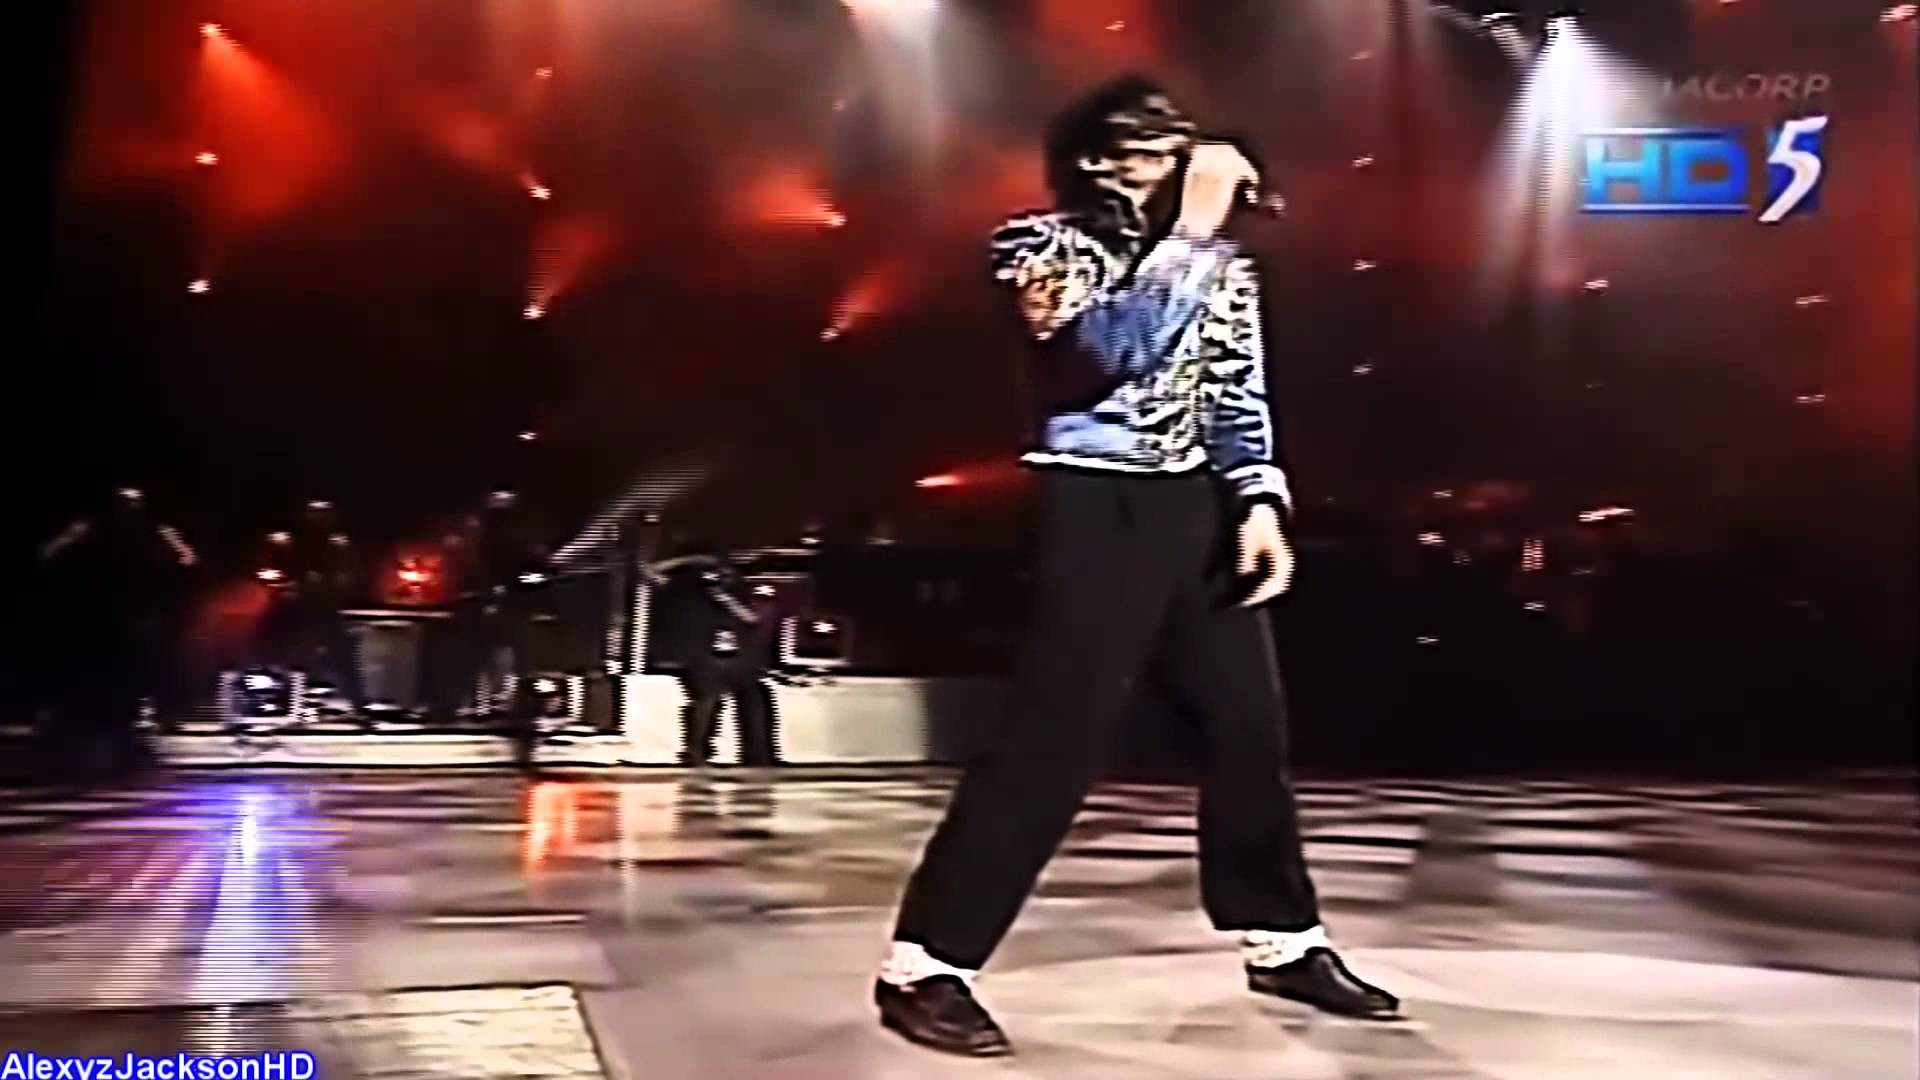 1920x1080 Michael Jackson's Blood On The Dance Floor images A Live Performance Of  "Blood On The Dancefloor" HD wallpaper and background photos